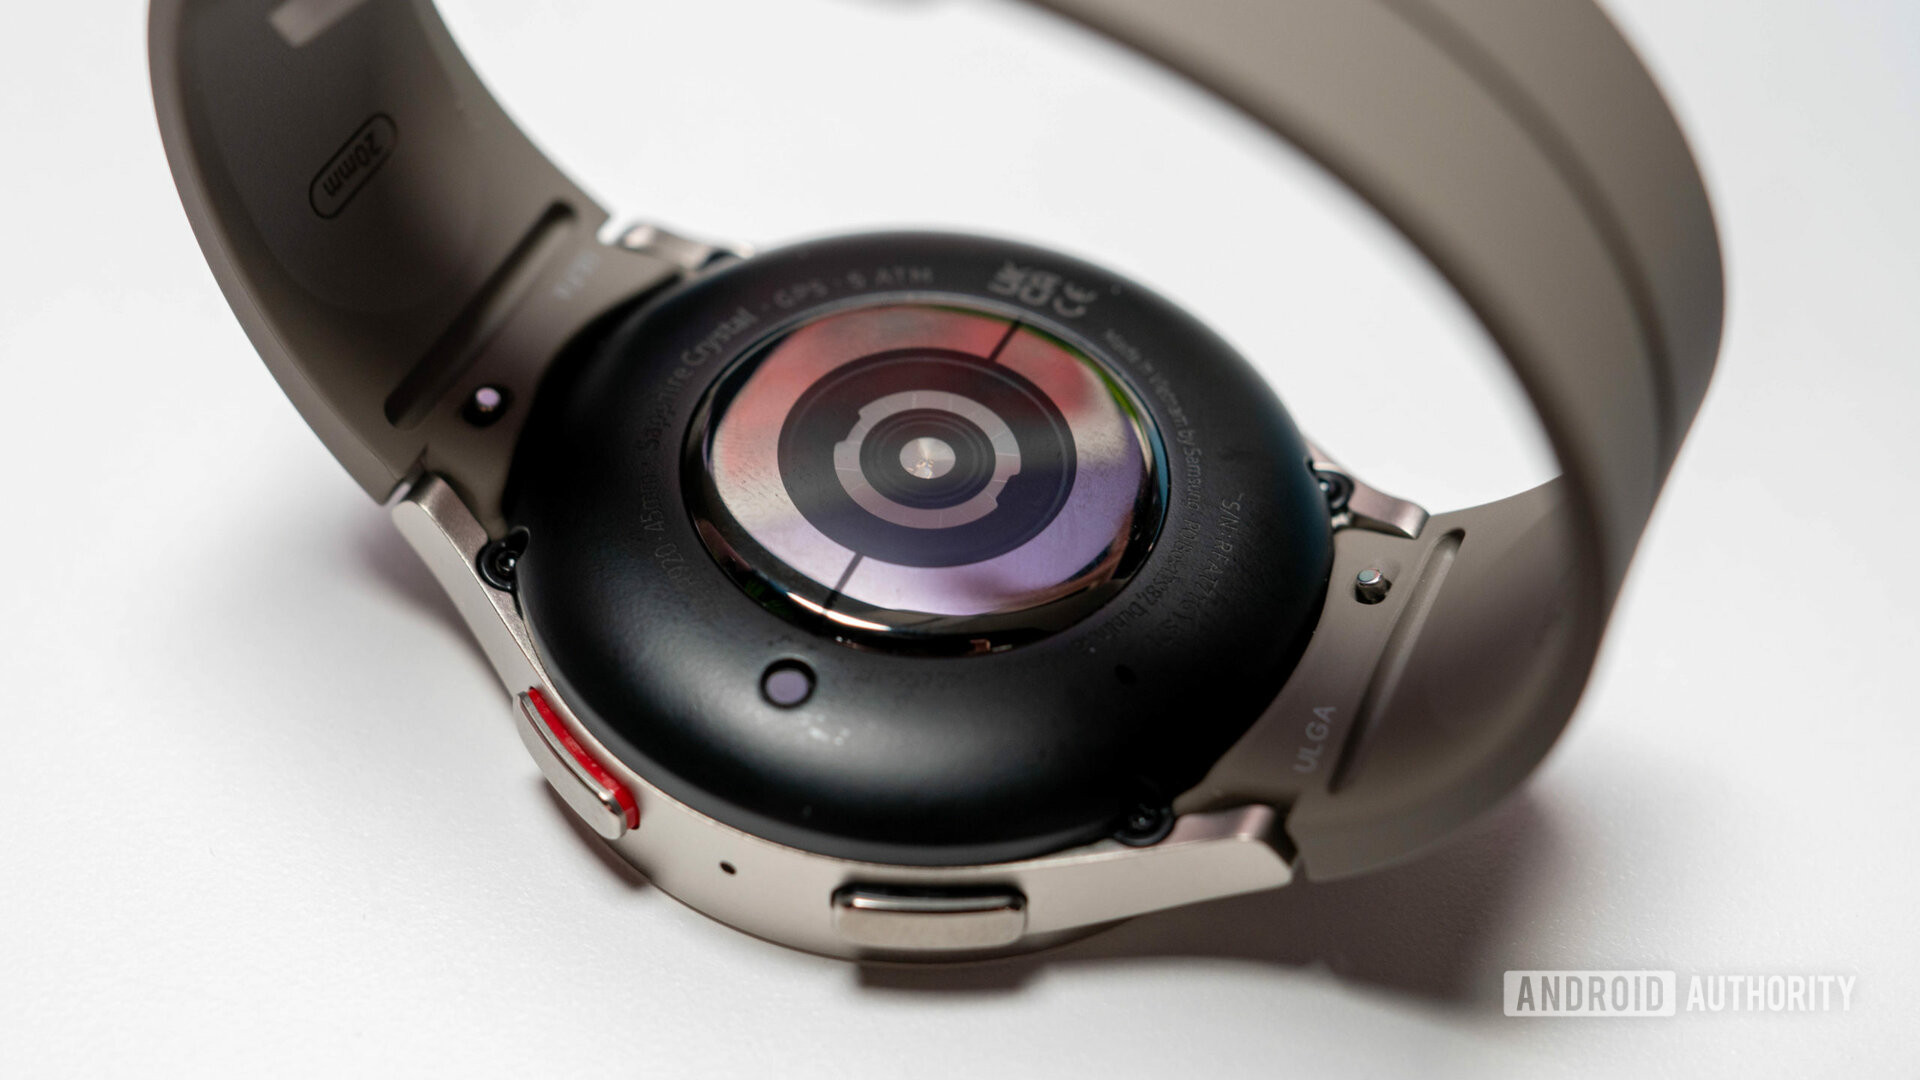 Samsung Galaxy Watch 5 Pro in silver color with fluoroelastomer strap showing rear sensors and buttons